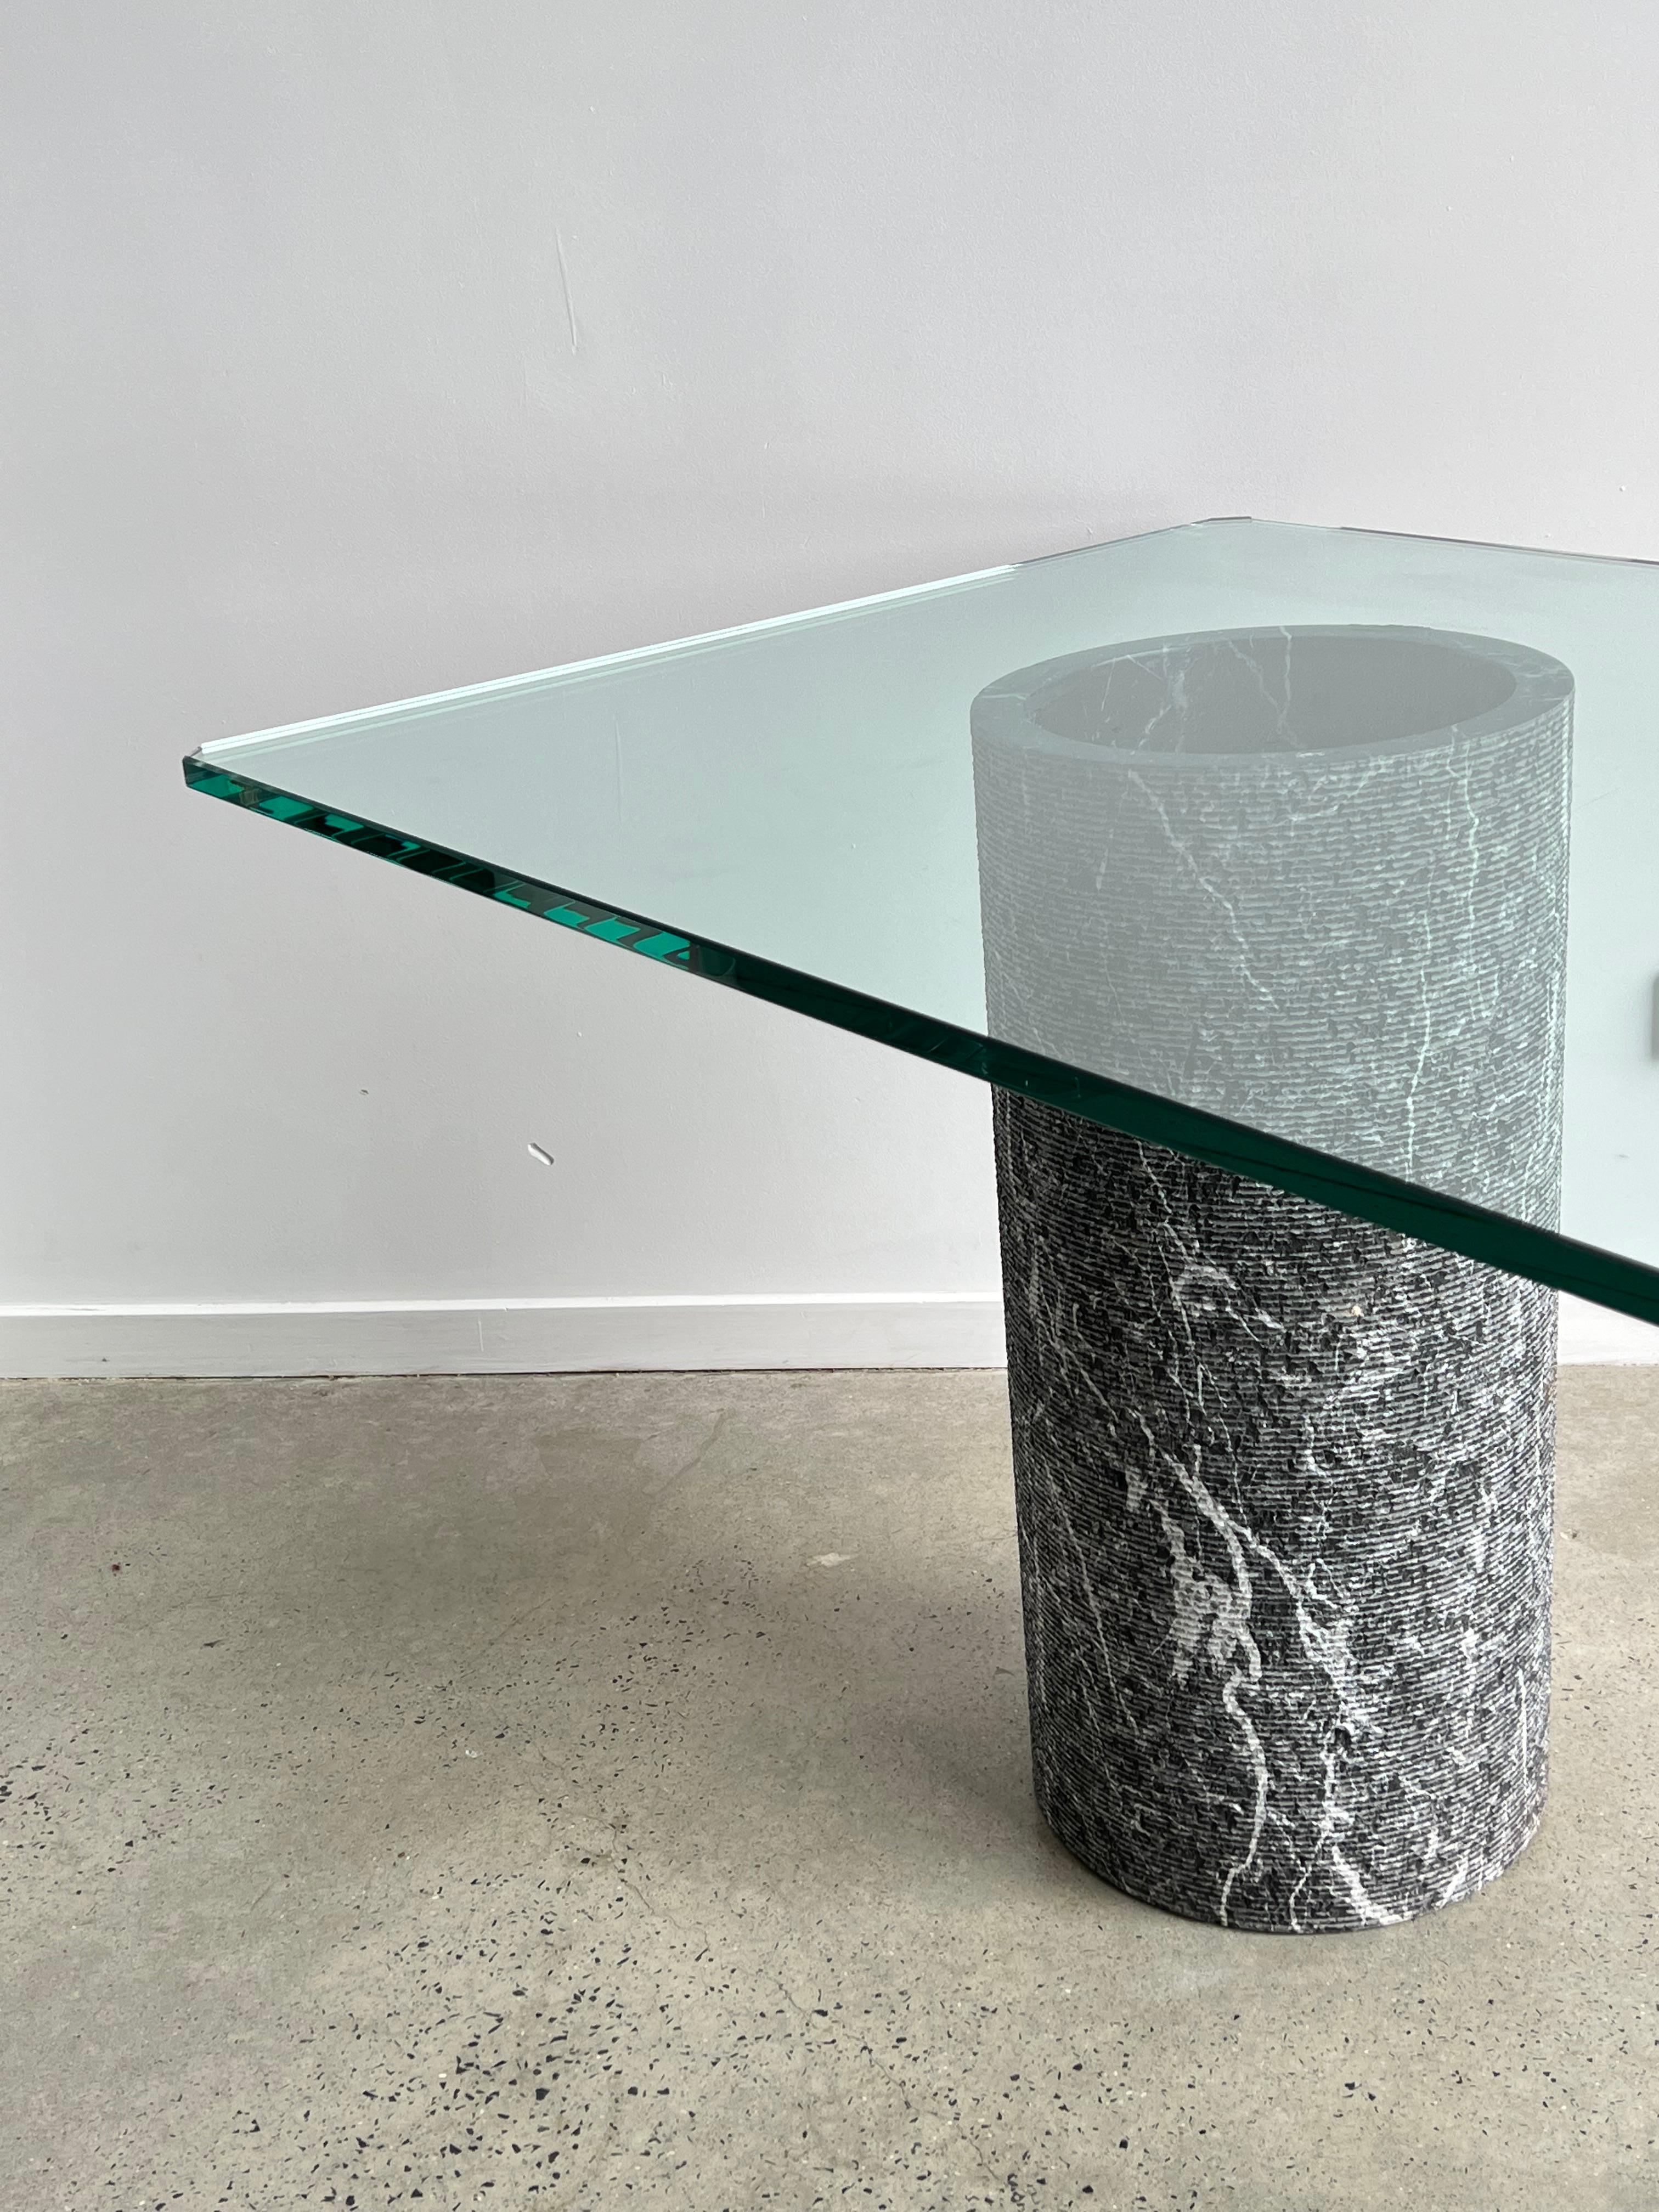 Late 20th Century Italian Black Marble and Glass Dining Table by Massimo Vignelli 1980s